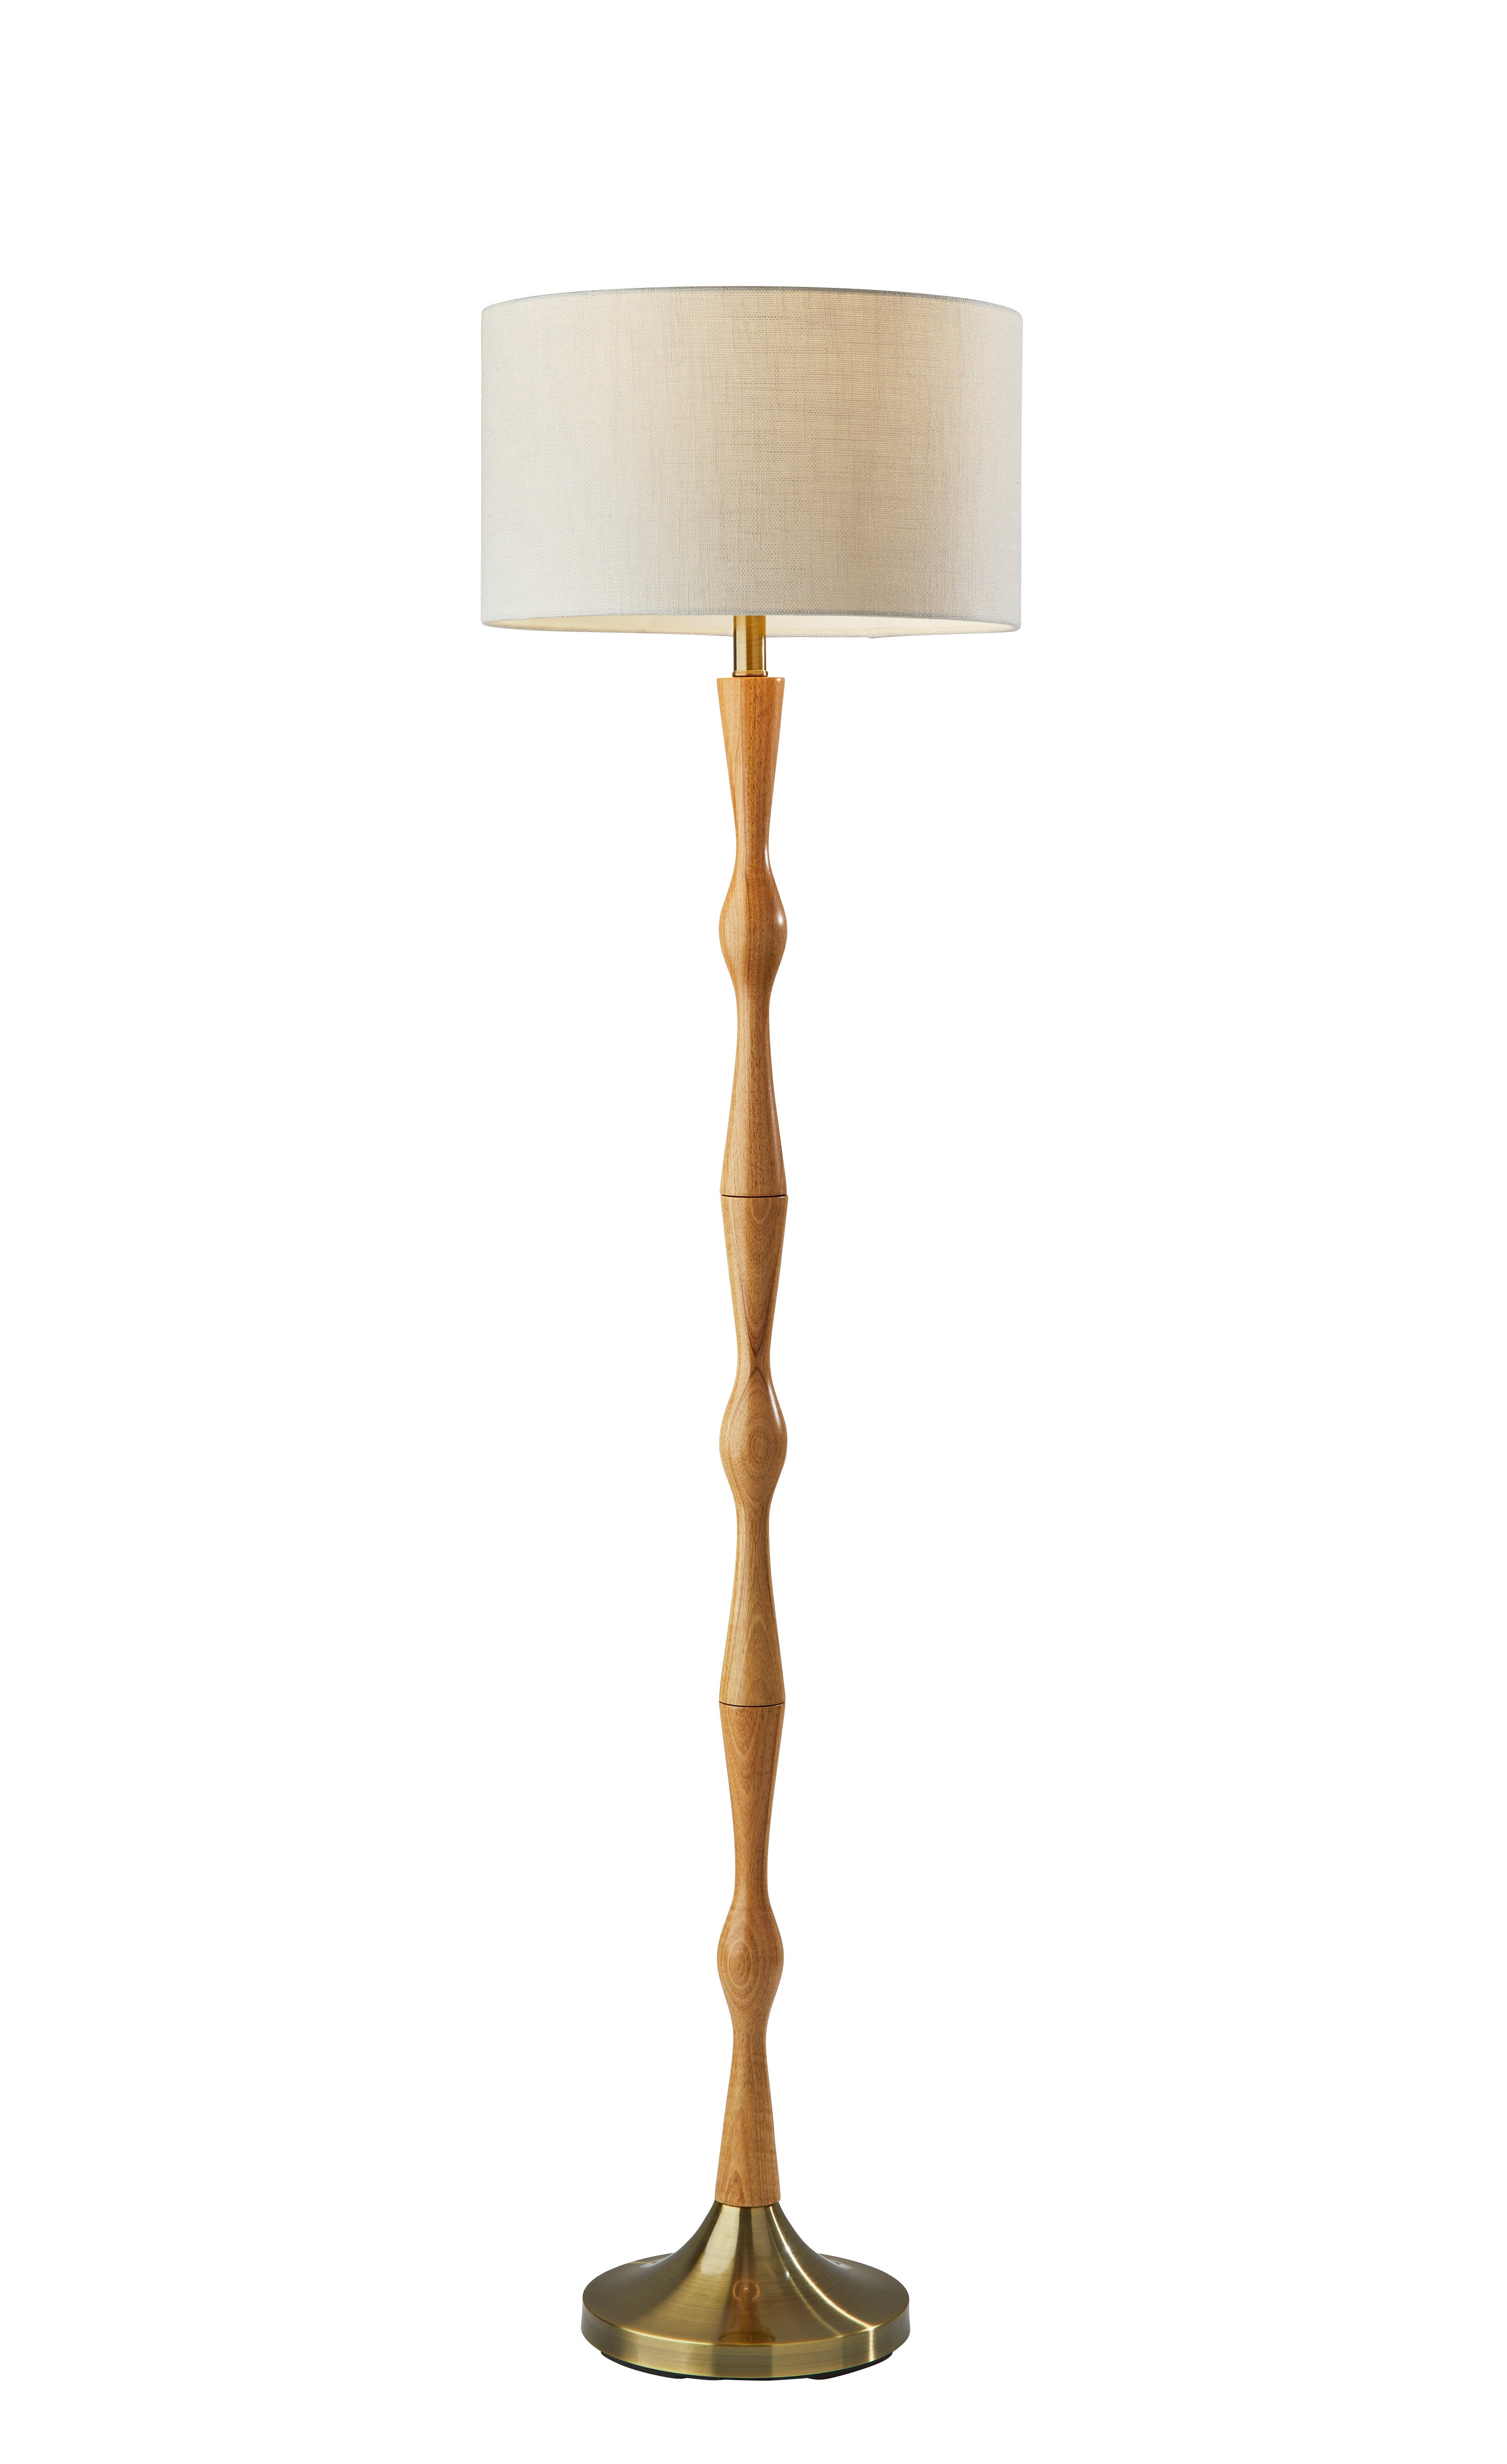 EVE Floor lamp Wood, Gold - 1577-12 | ADESSO